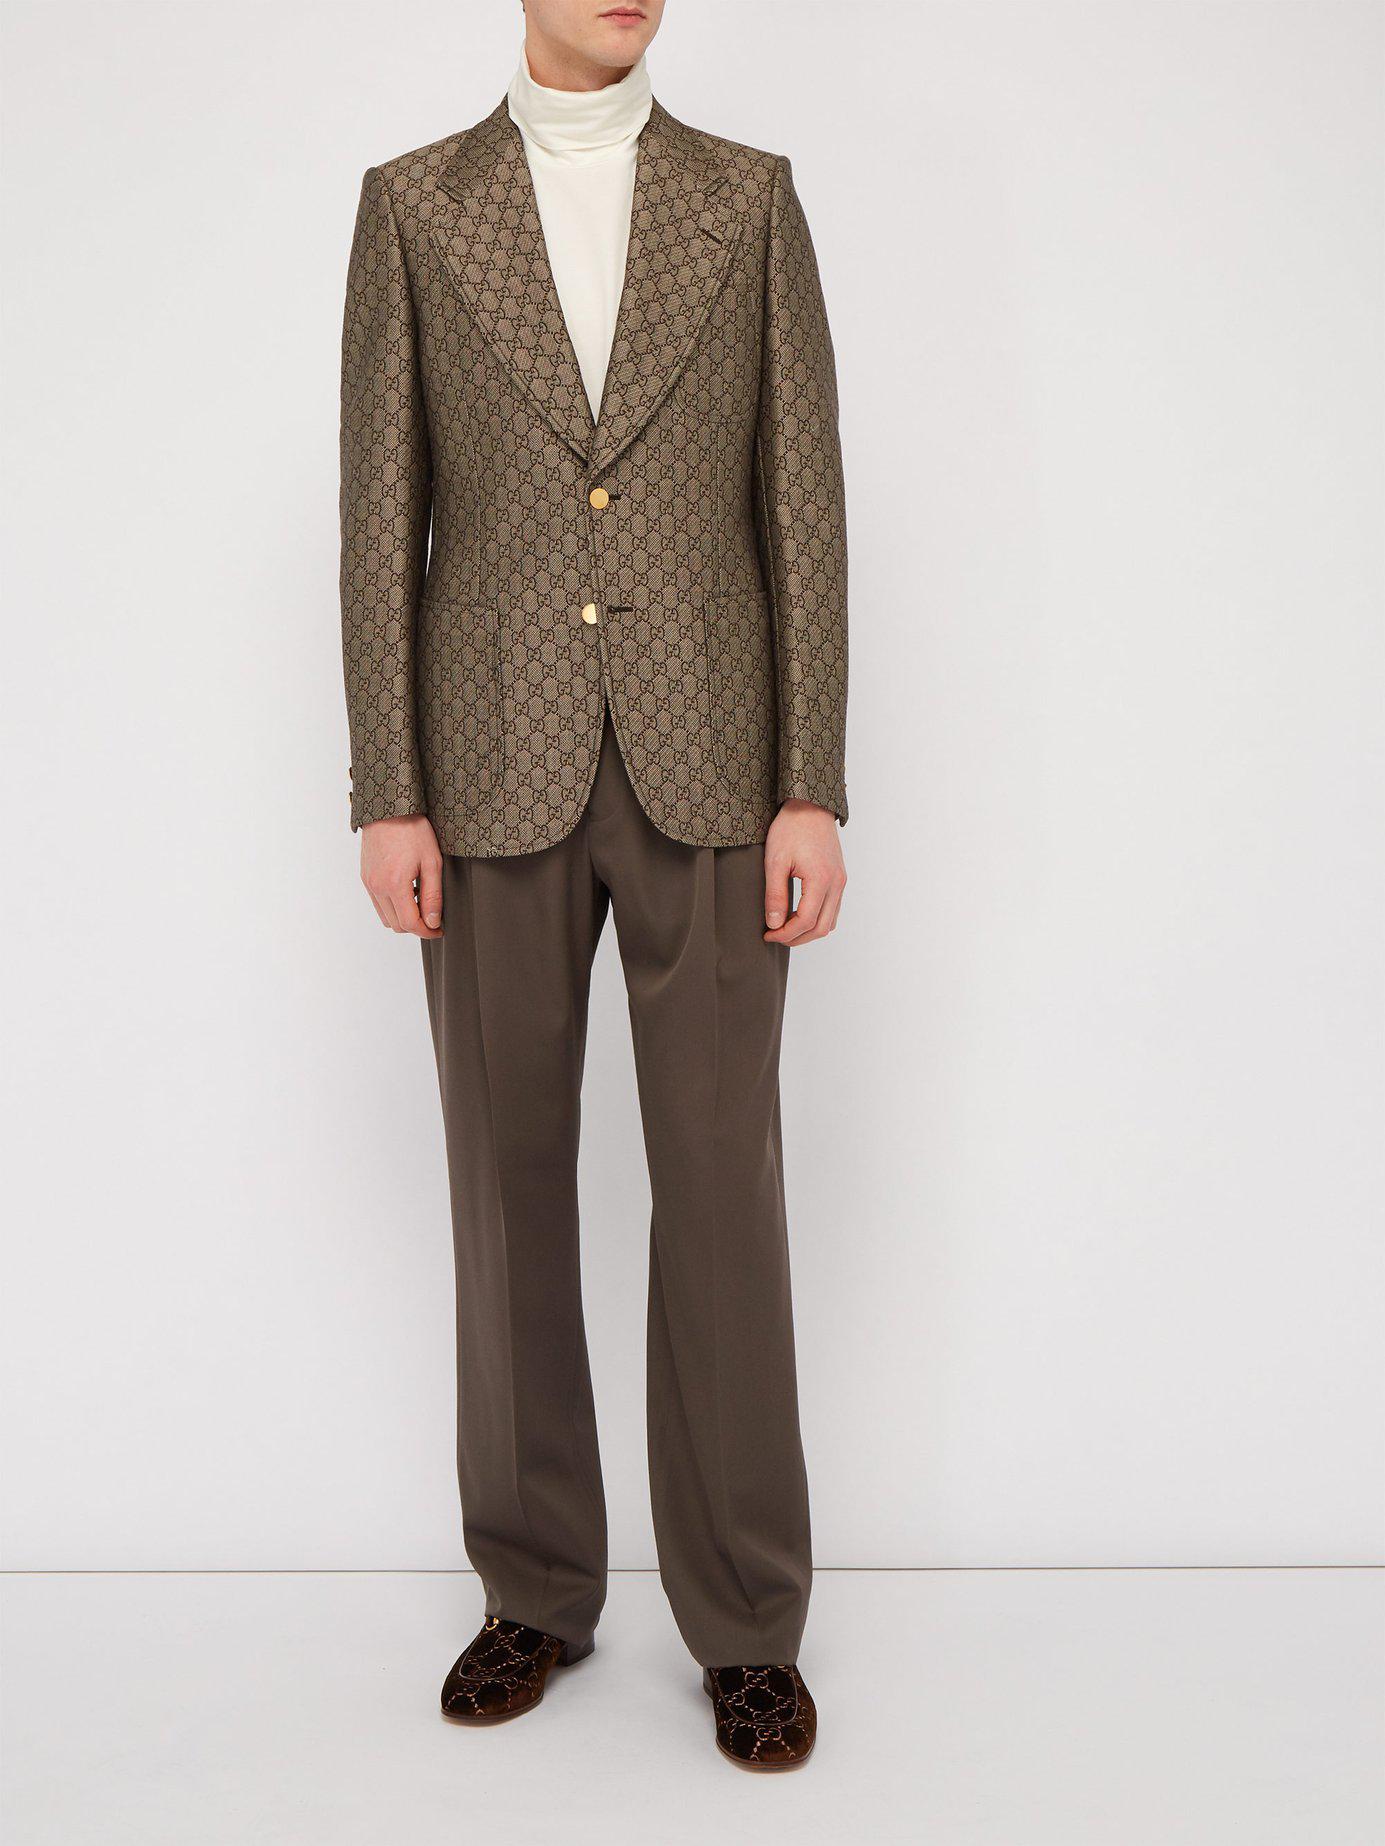 Gucci Cotton Gg Monogram Single Breasted Suit Jacket in Beige (Natural ...